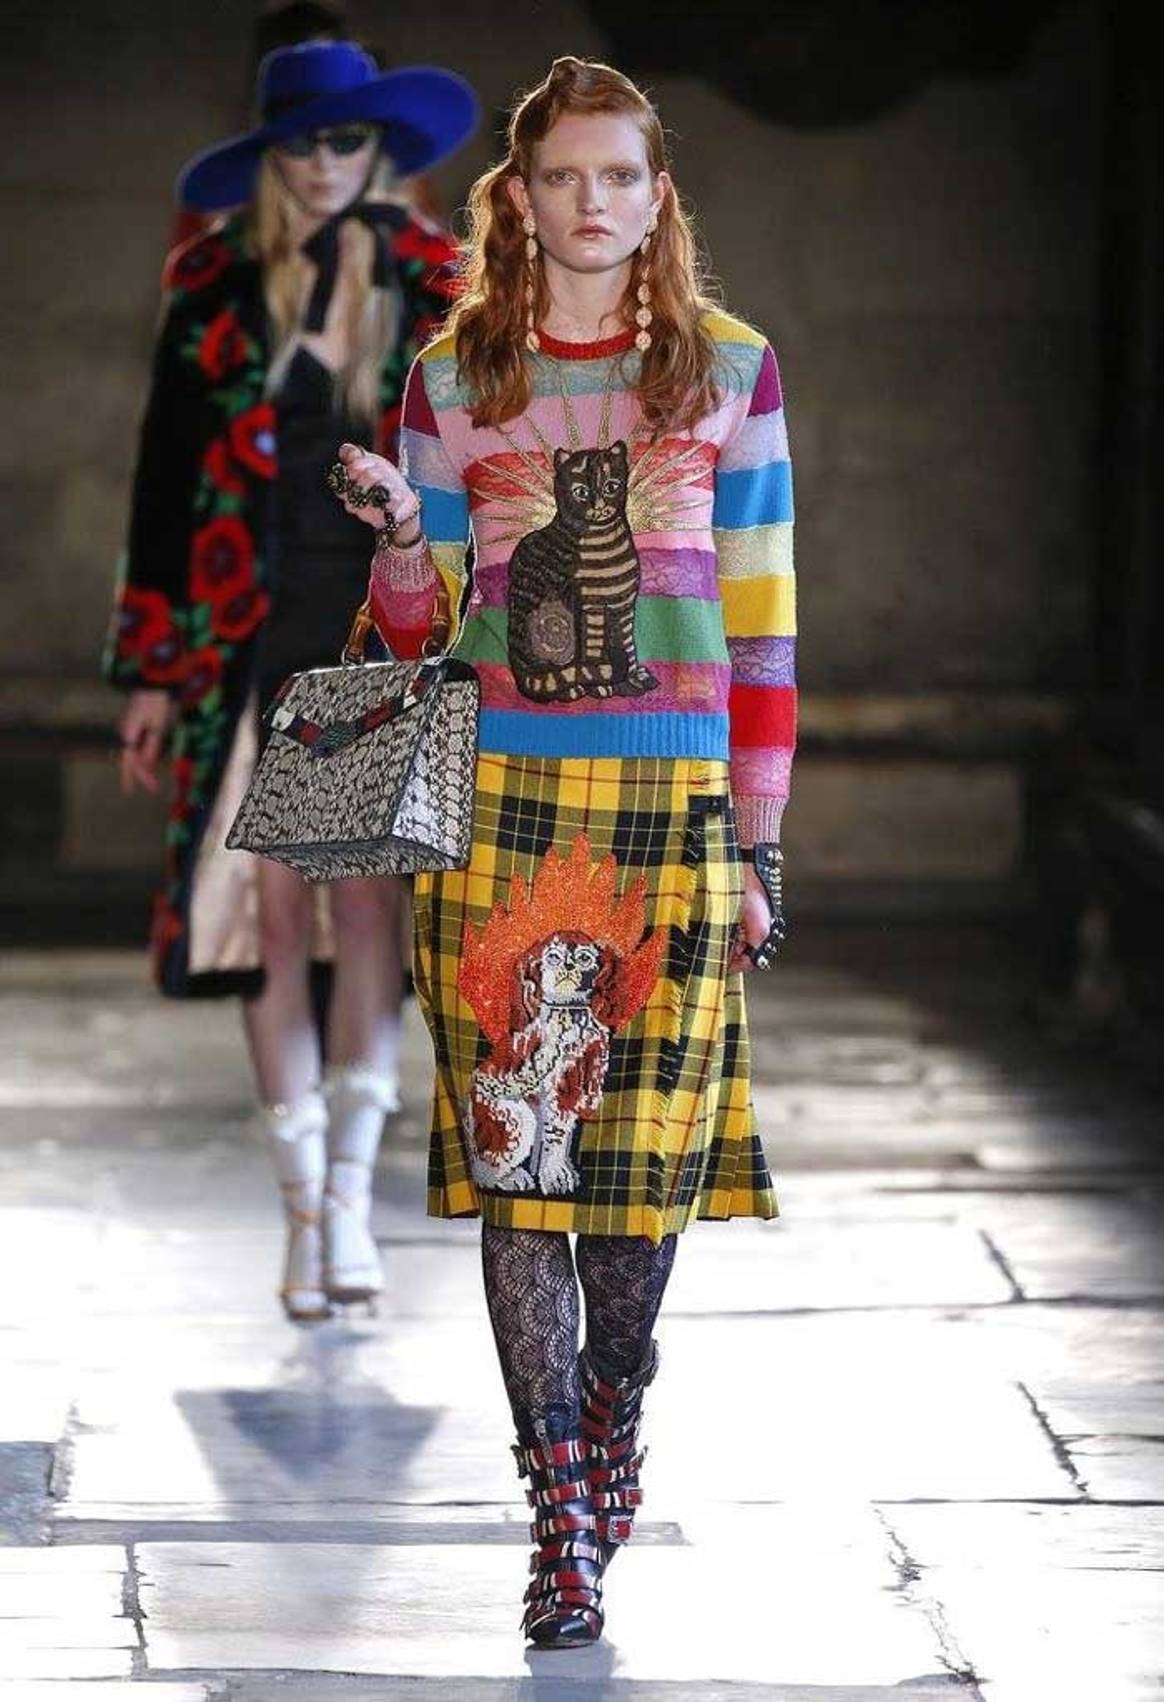 In Beeld: Gucci cruise show in Westminster Abbey